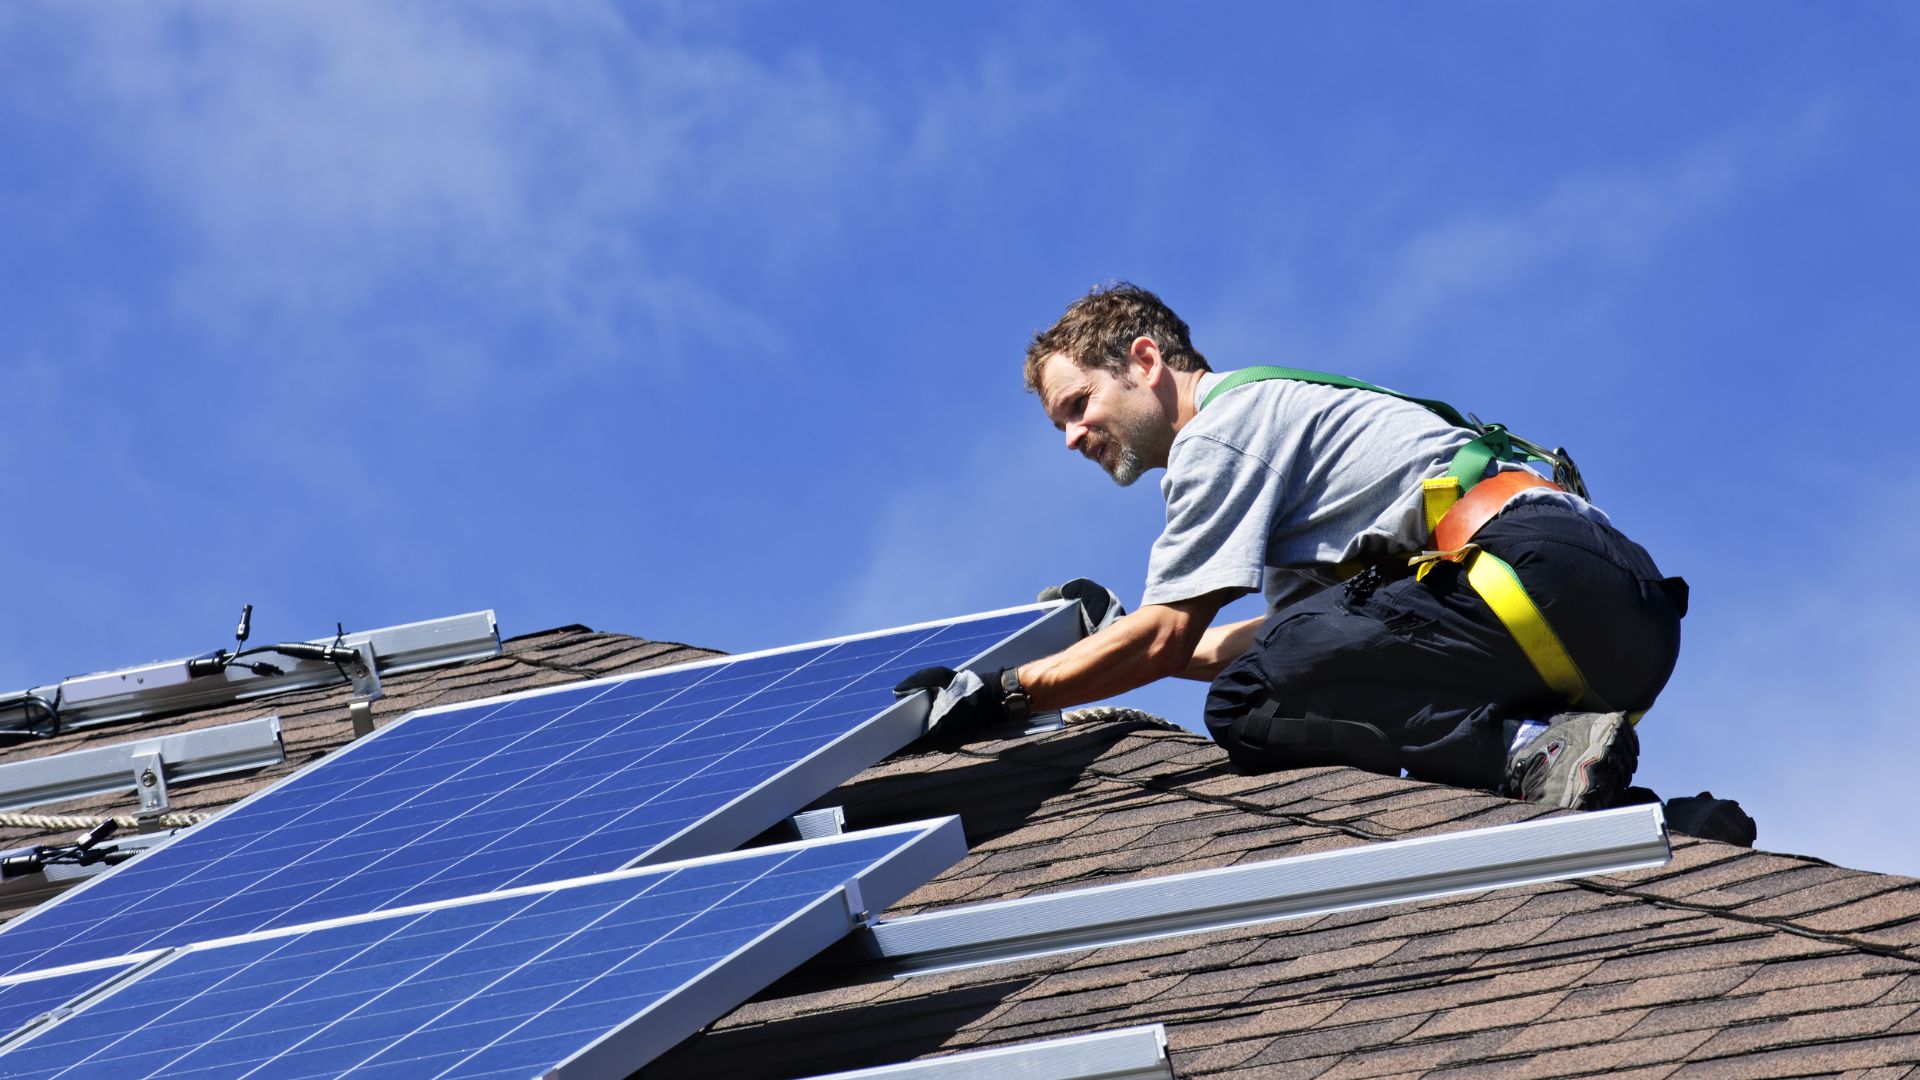 Man on a roof fixing solar panels in bright sunshine